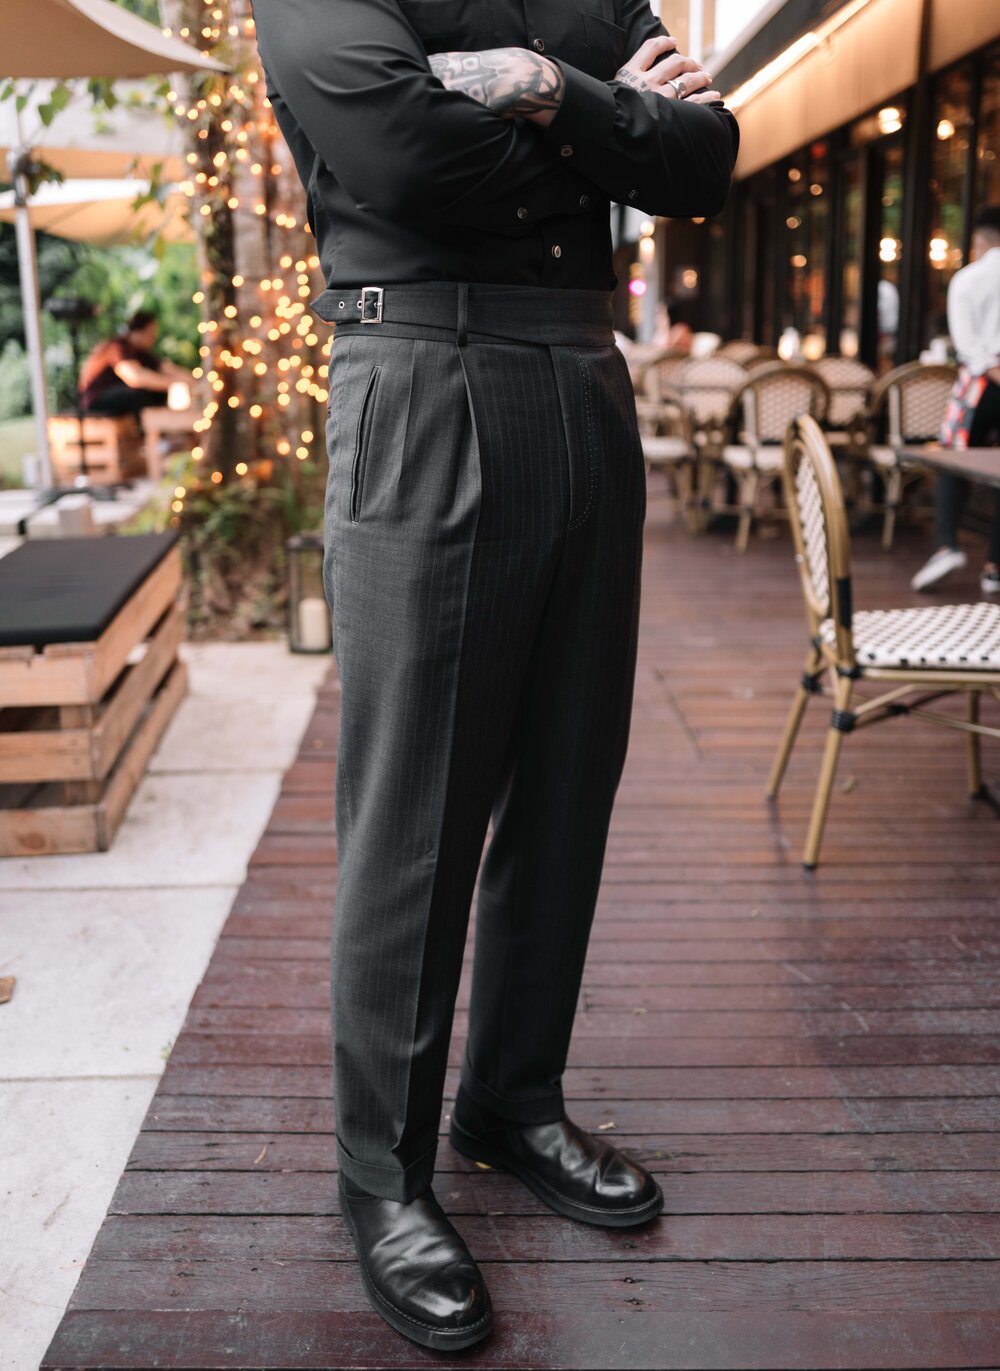 Made Suits® Singapore Tailor — High-Waisted Trousers Flatter Every Men ...